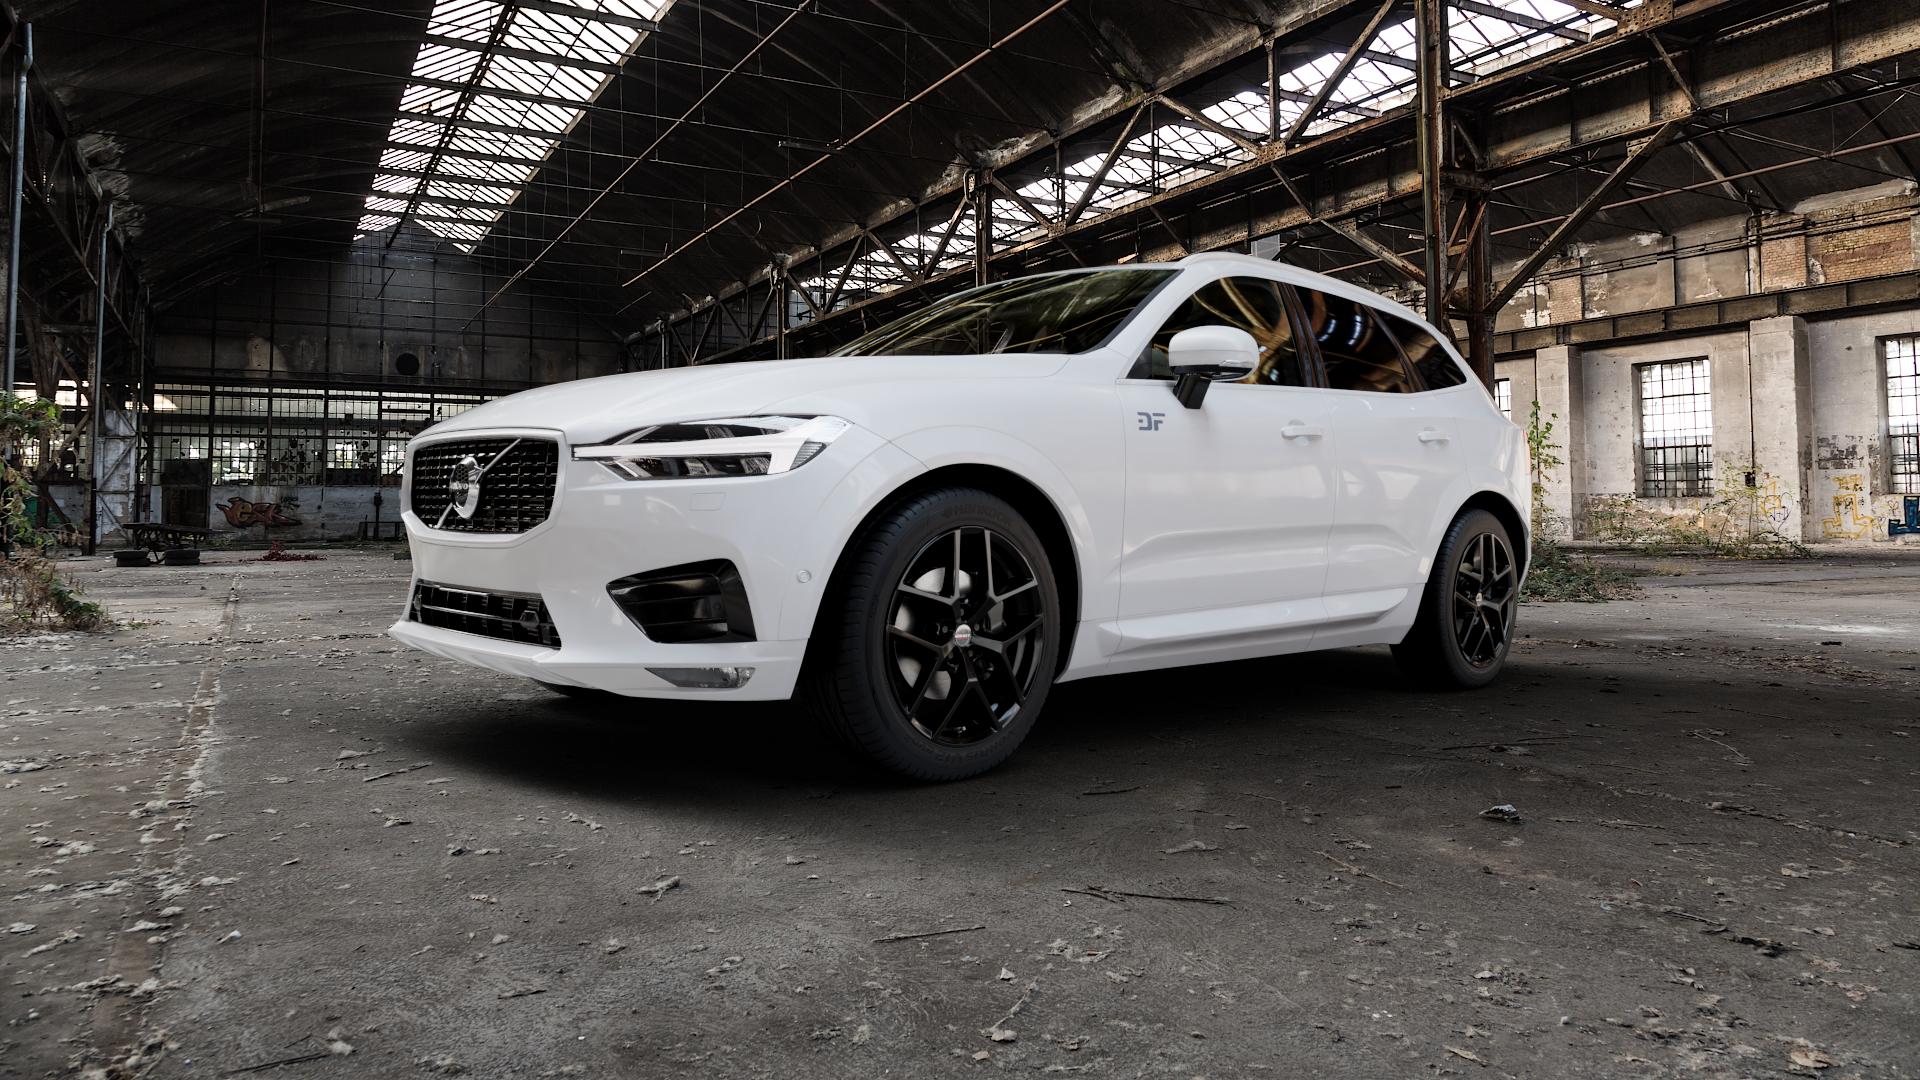 Volvo XC60 Type U 2,0l D4 AWD 147kW Polestar Performance (200 hp) Wheels  and Tyre Packages | velonity.com